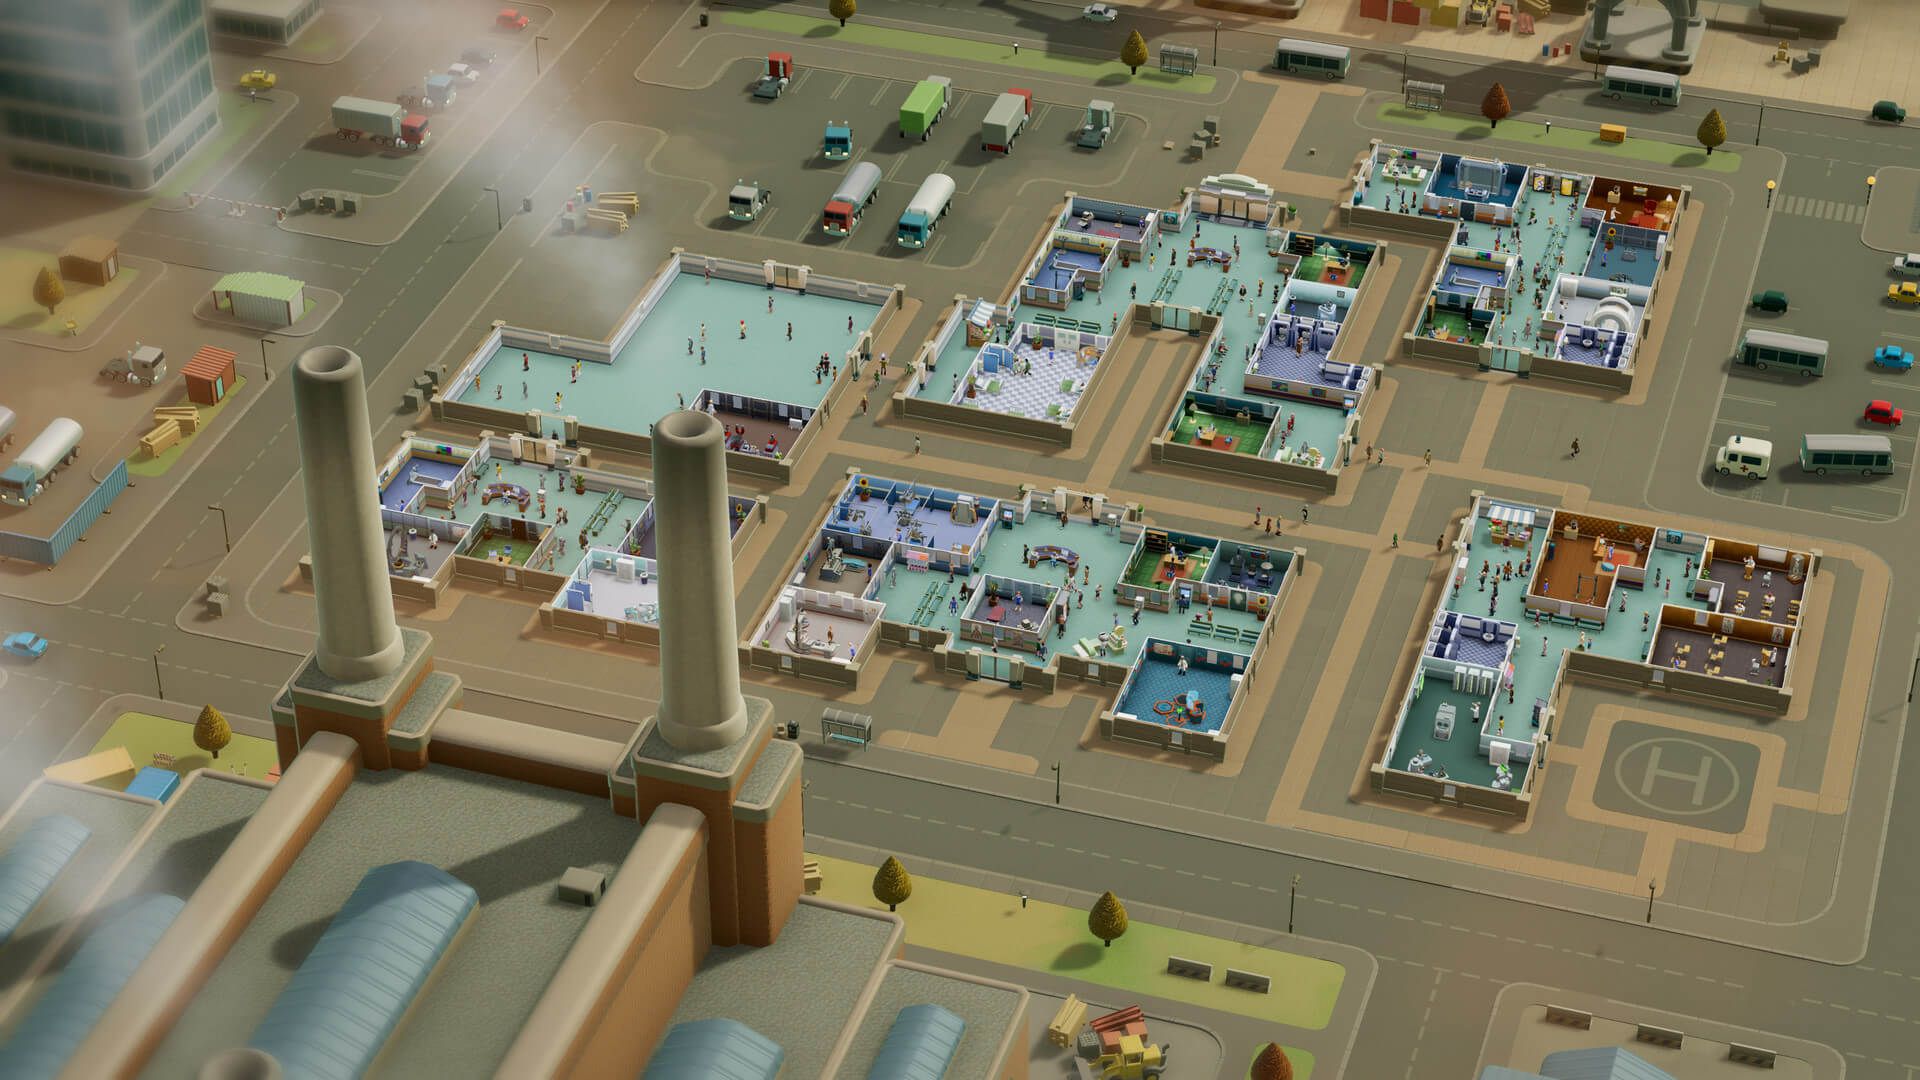 two point hospital mac download free